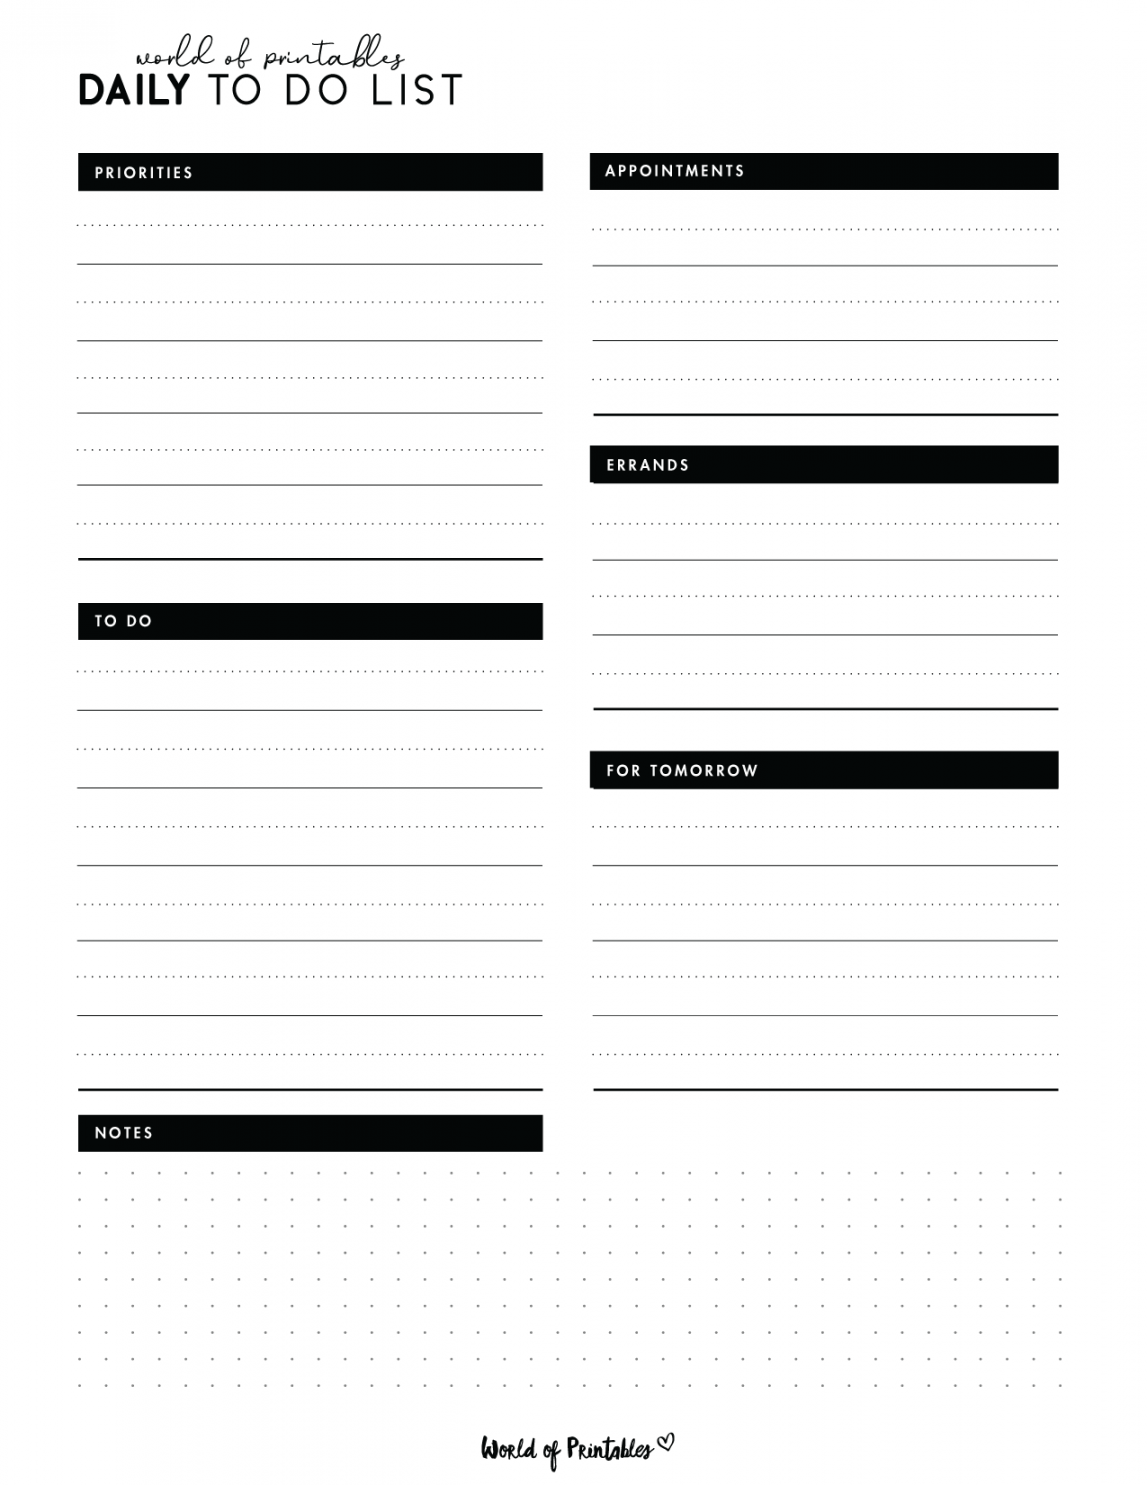 Free Printable Daily To Do List For Work - Printable - Daily To Do List Templates - World of Printables